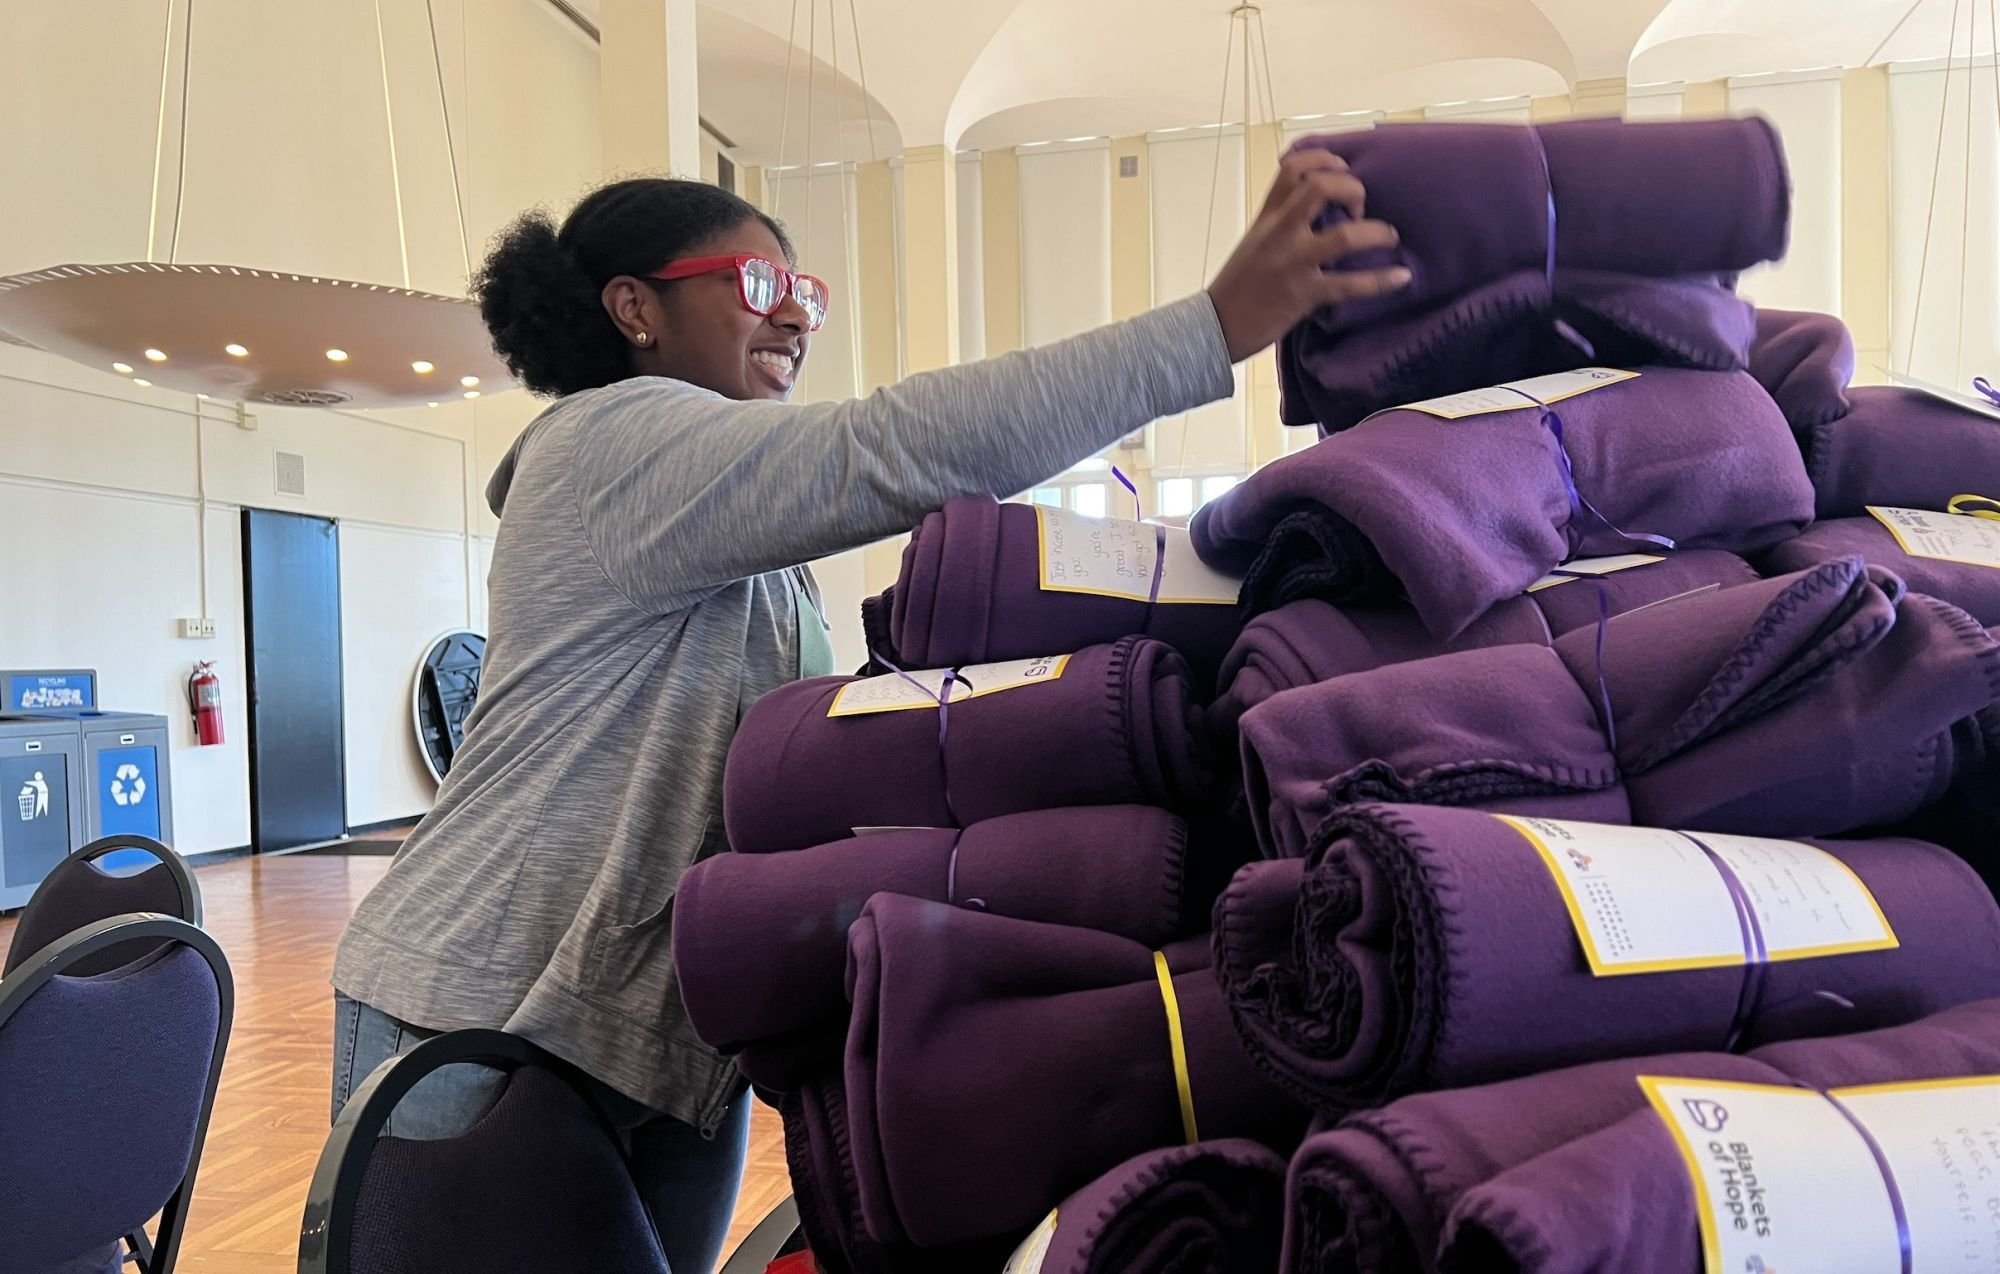 A smiling student places a purple blanket wrapped in ribbon atop a pile of purple blankets destined for area nonprofits.